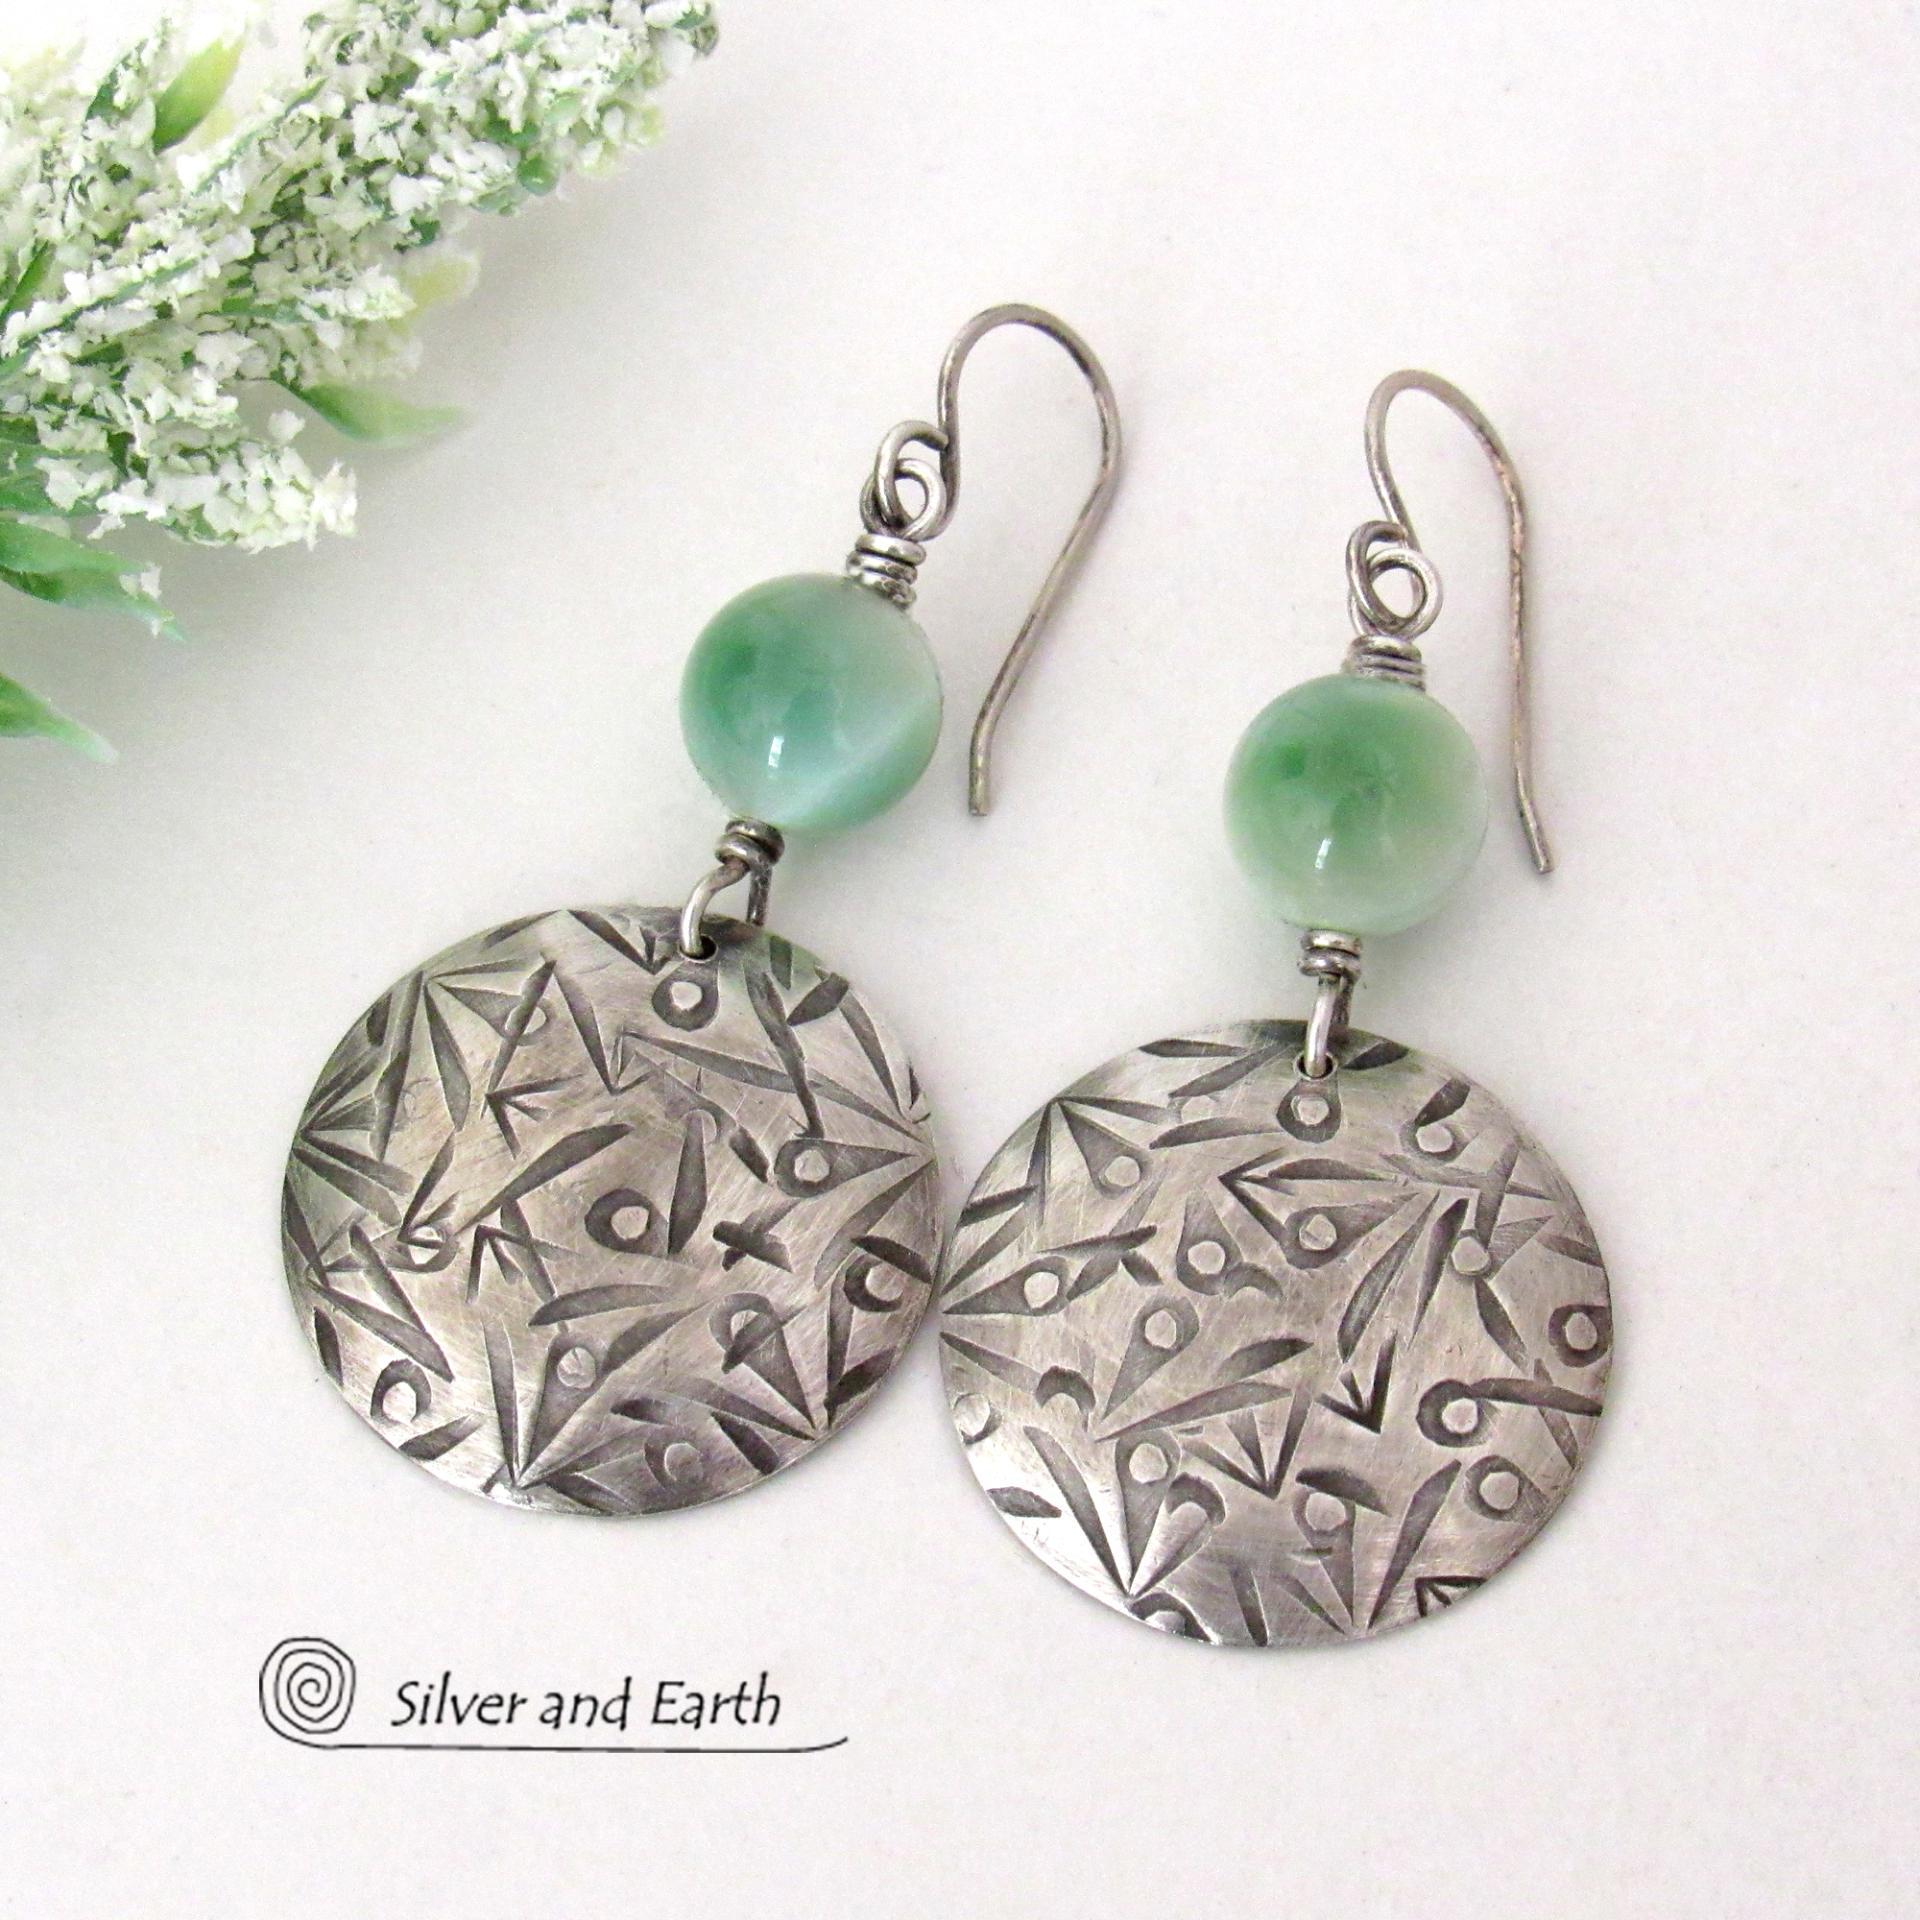 Green Moonstone Sterling Silver Earrings - Artisan Handcrafted Modern Sterling and Gemstone Jewelry